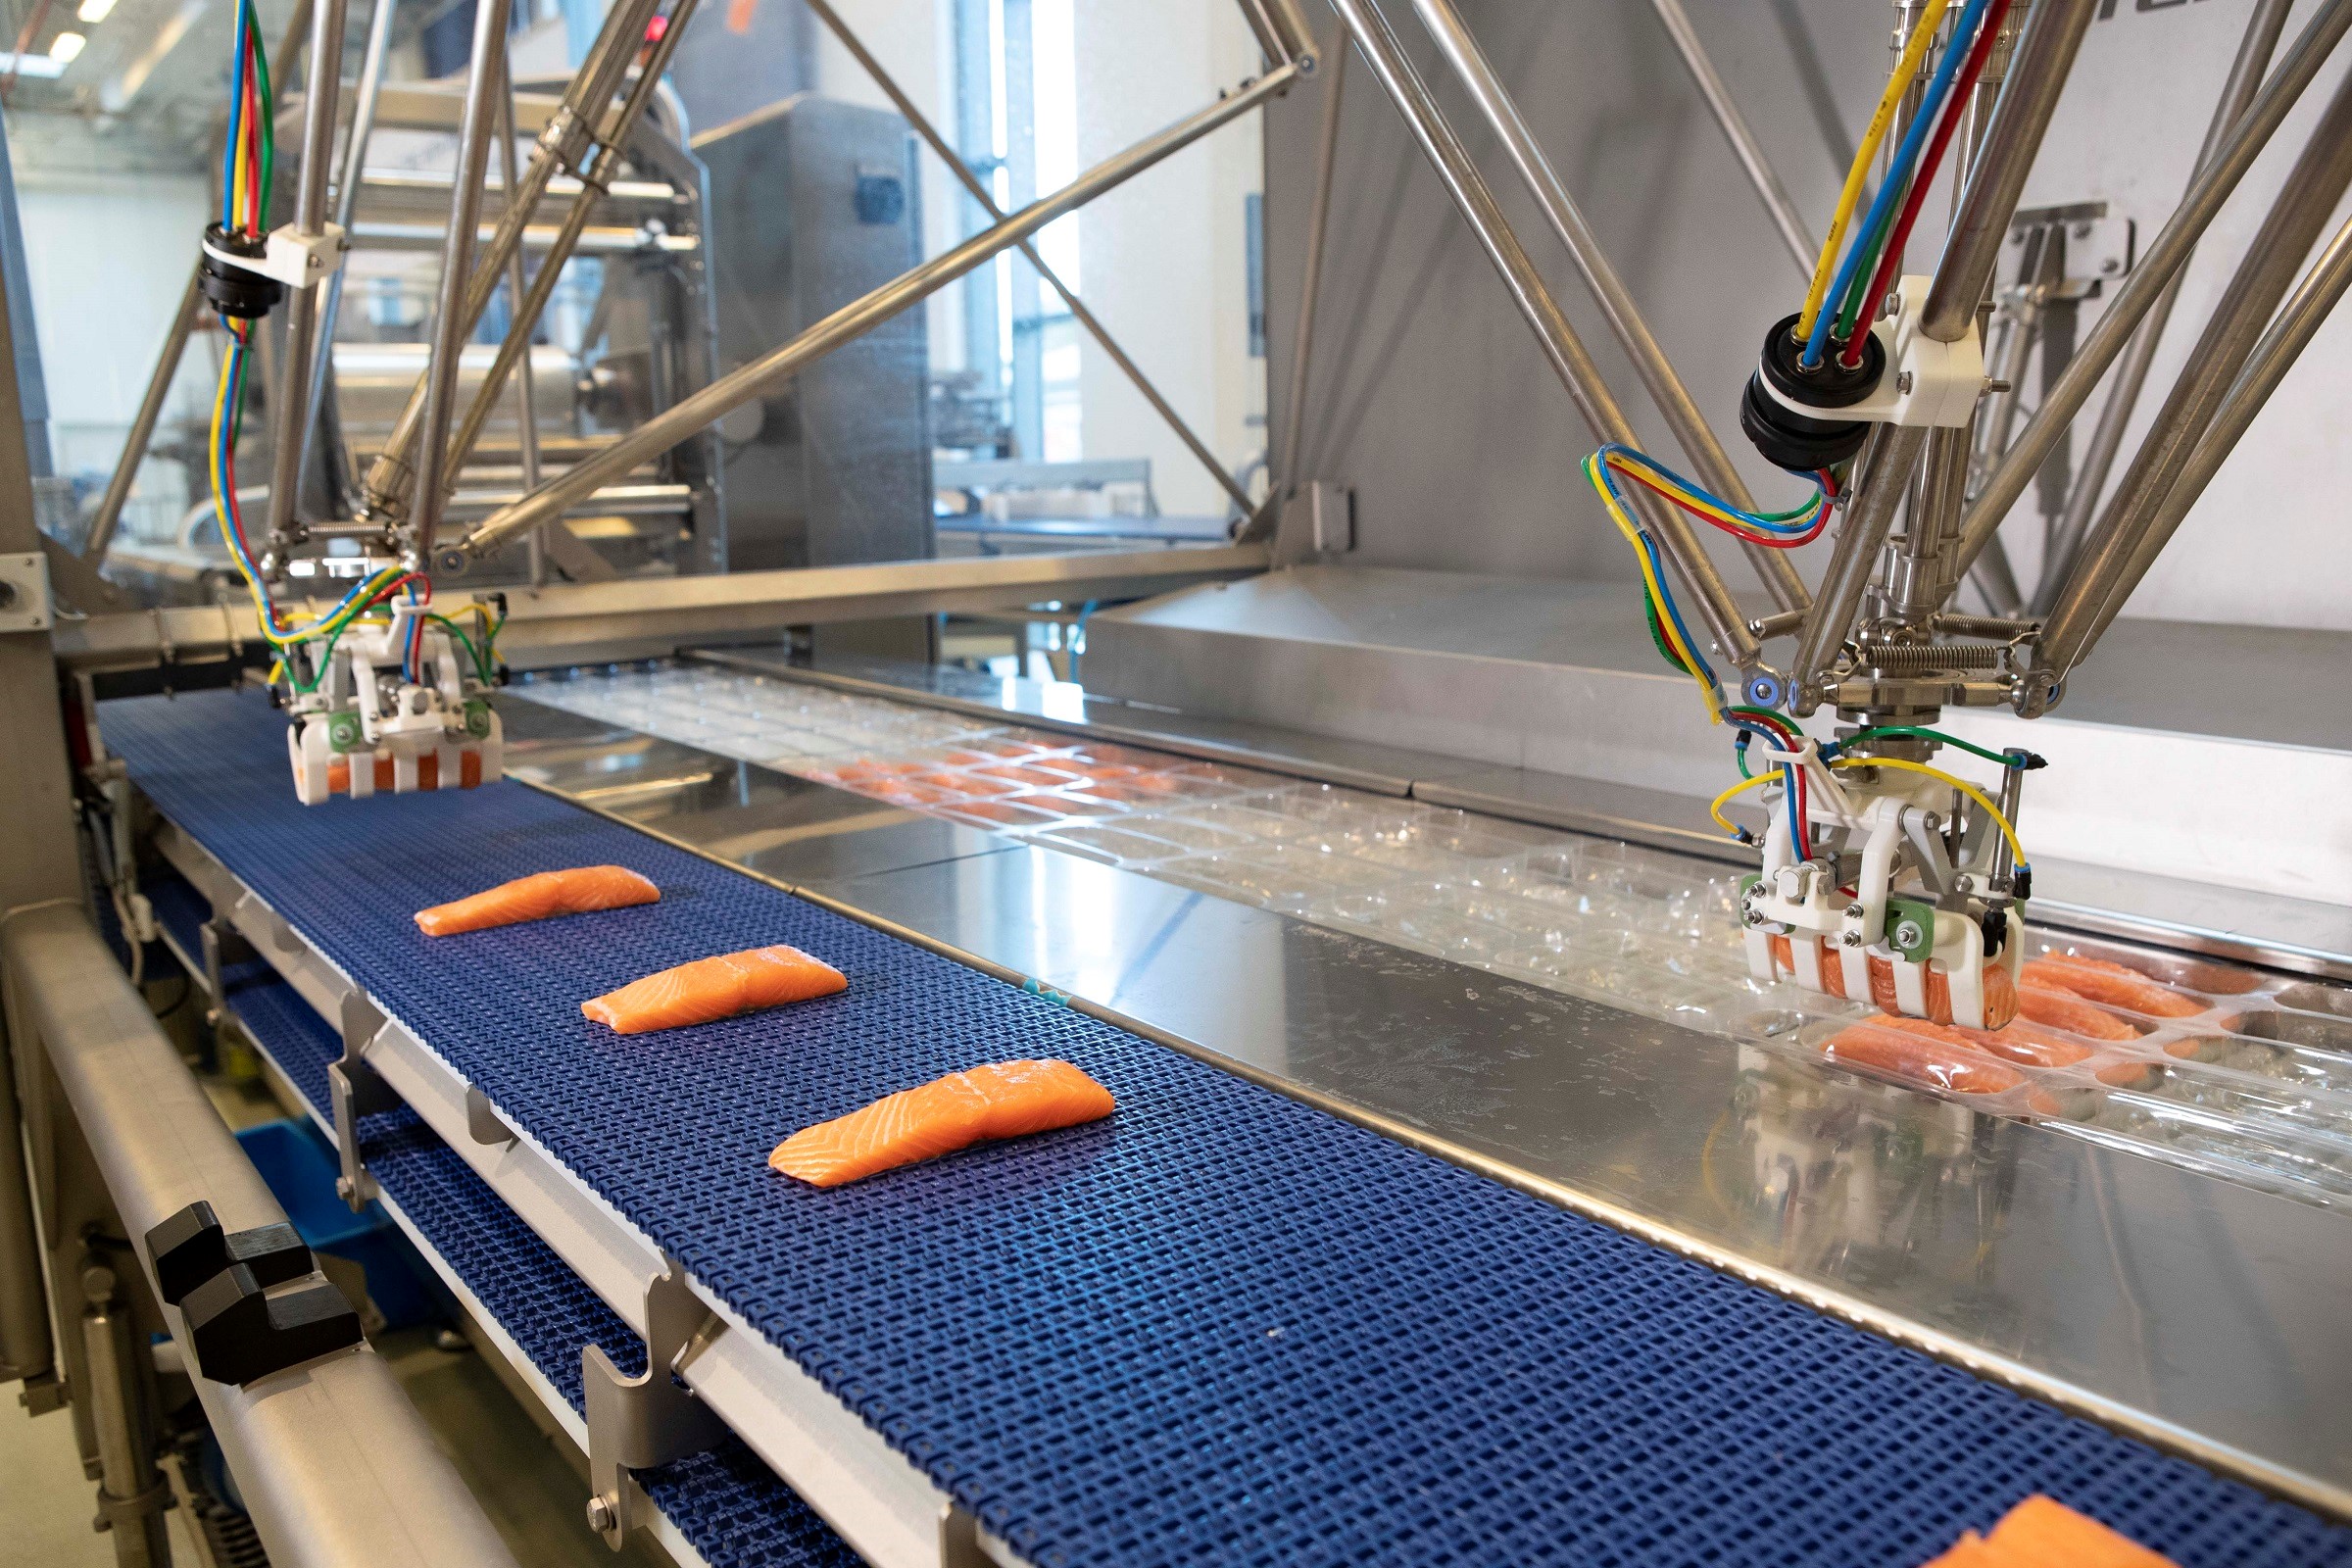 Marel's Robobatcher Thermoformer for automated packing and styling of salmon portions for retail packs